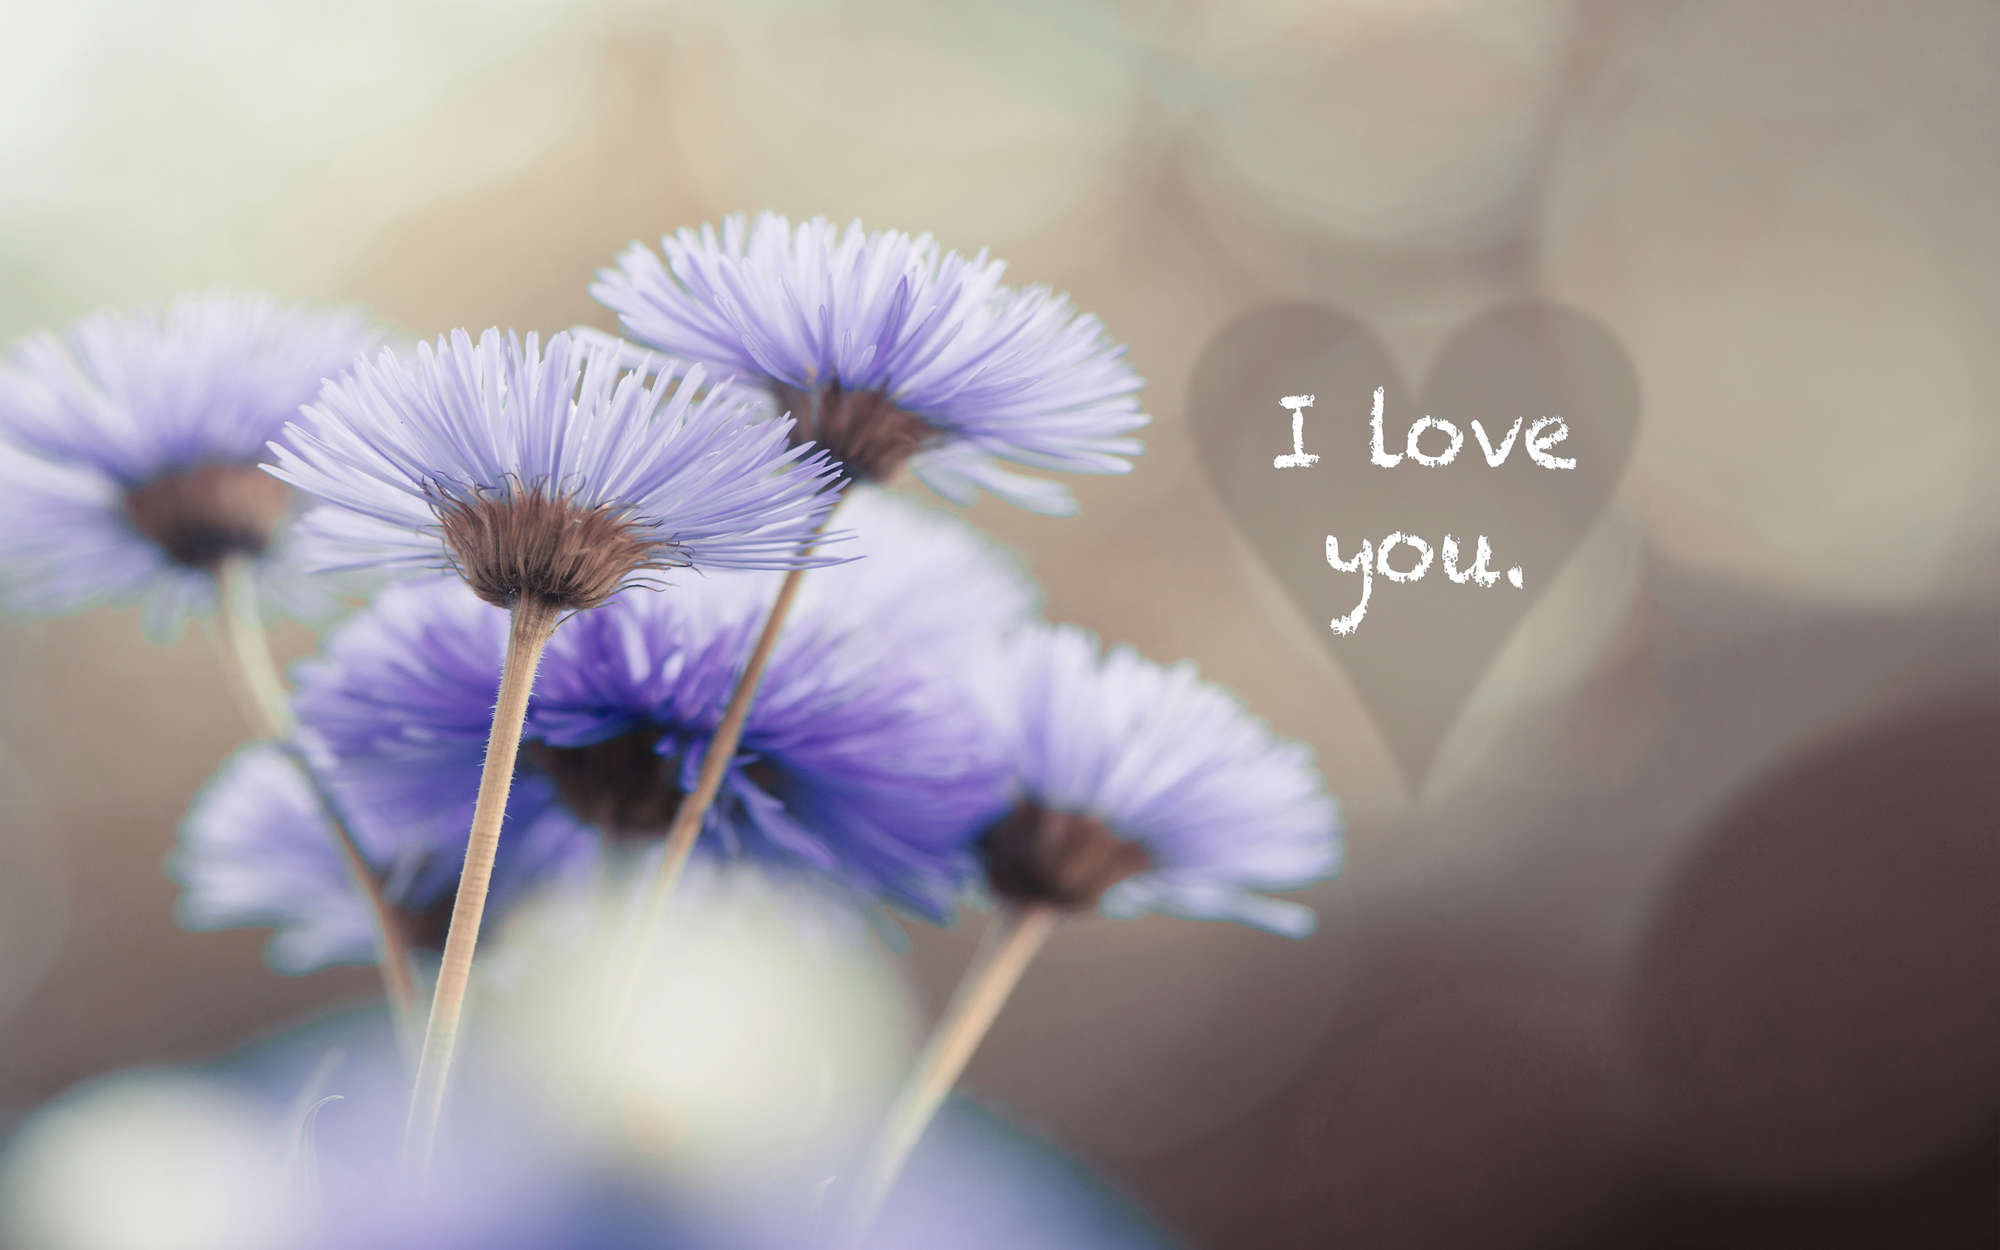             Photo wallpaper flowers in violet with lettering "I love you" - textured non-woven
        